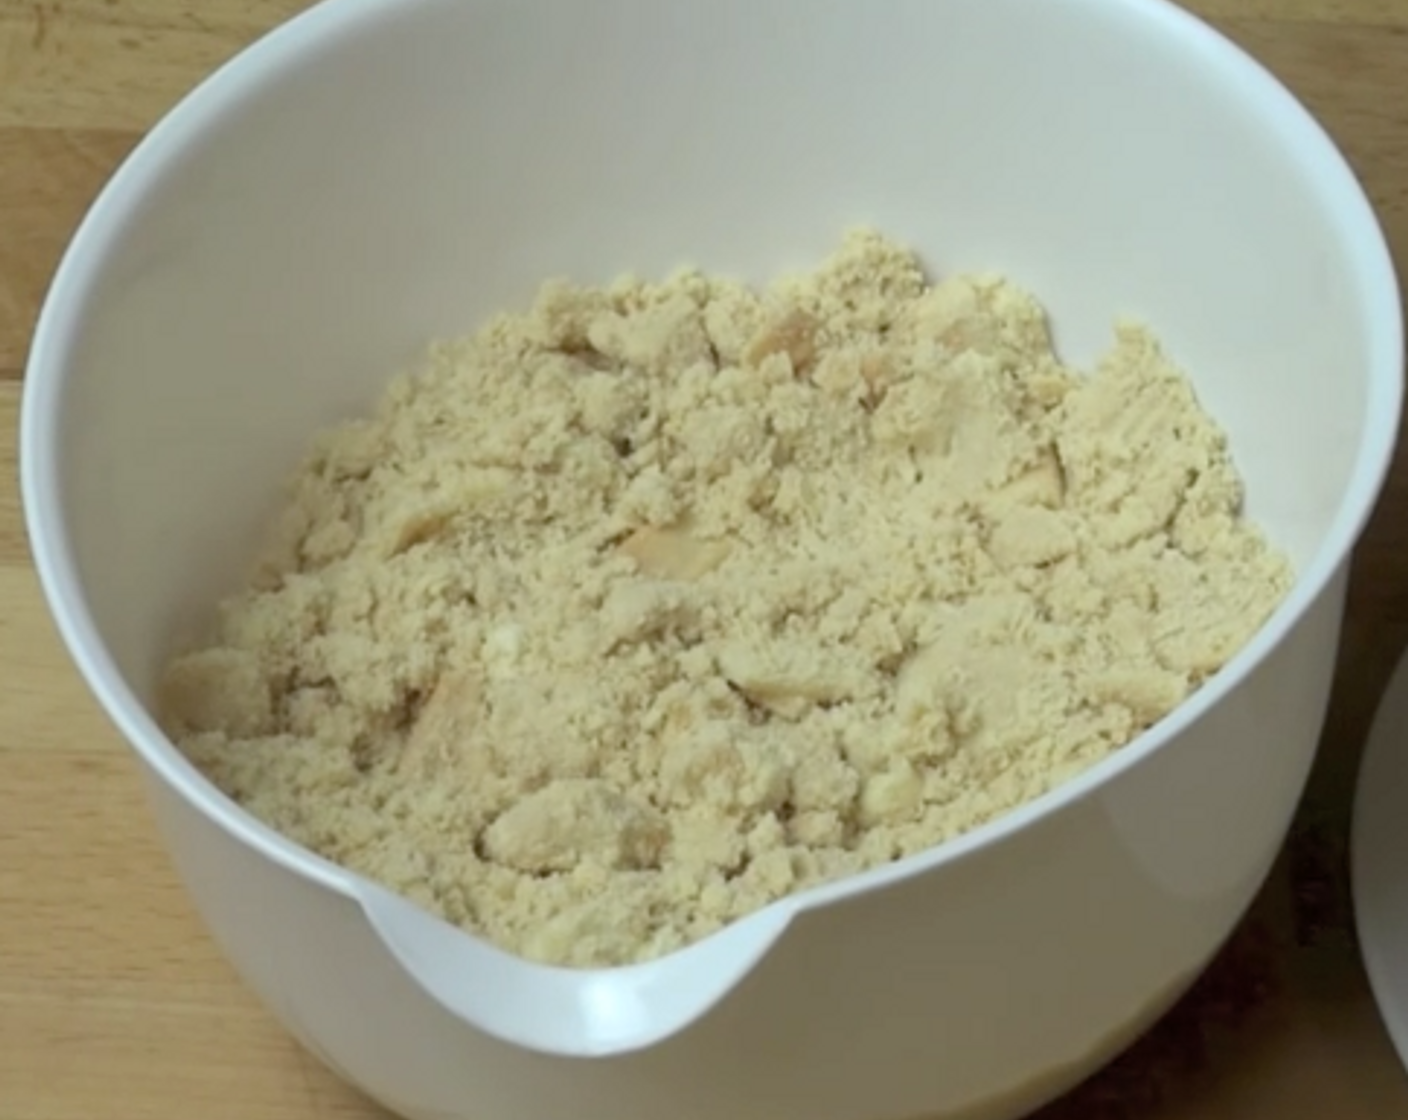 step 1 Into a bowl, add in and mix your crushed Vanilla Cream-Filled Cookies (20), and Butter (3 Tbsp).